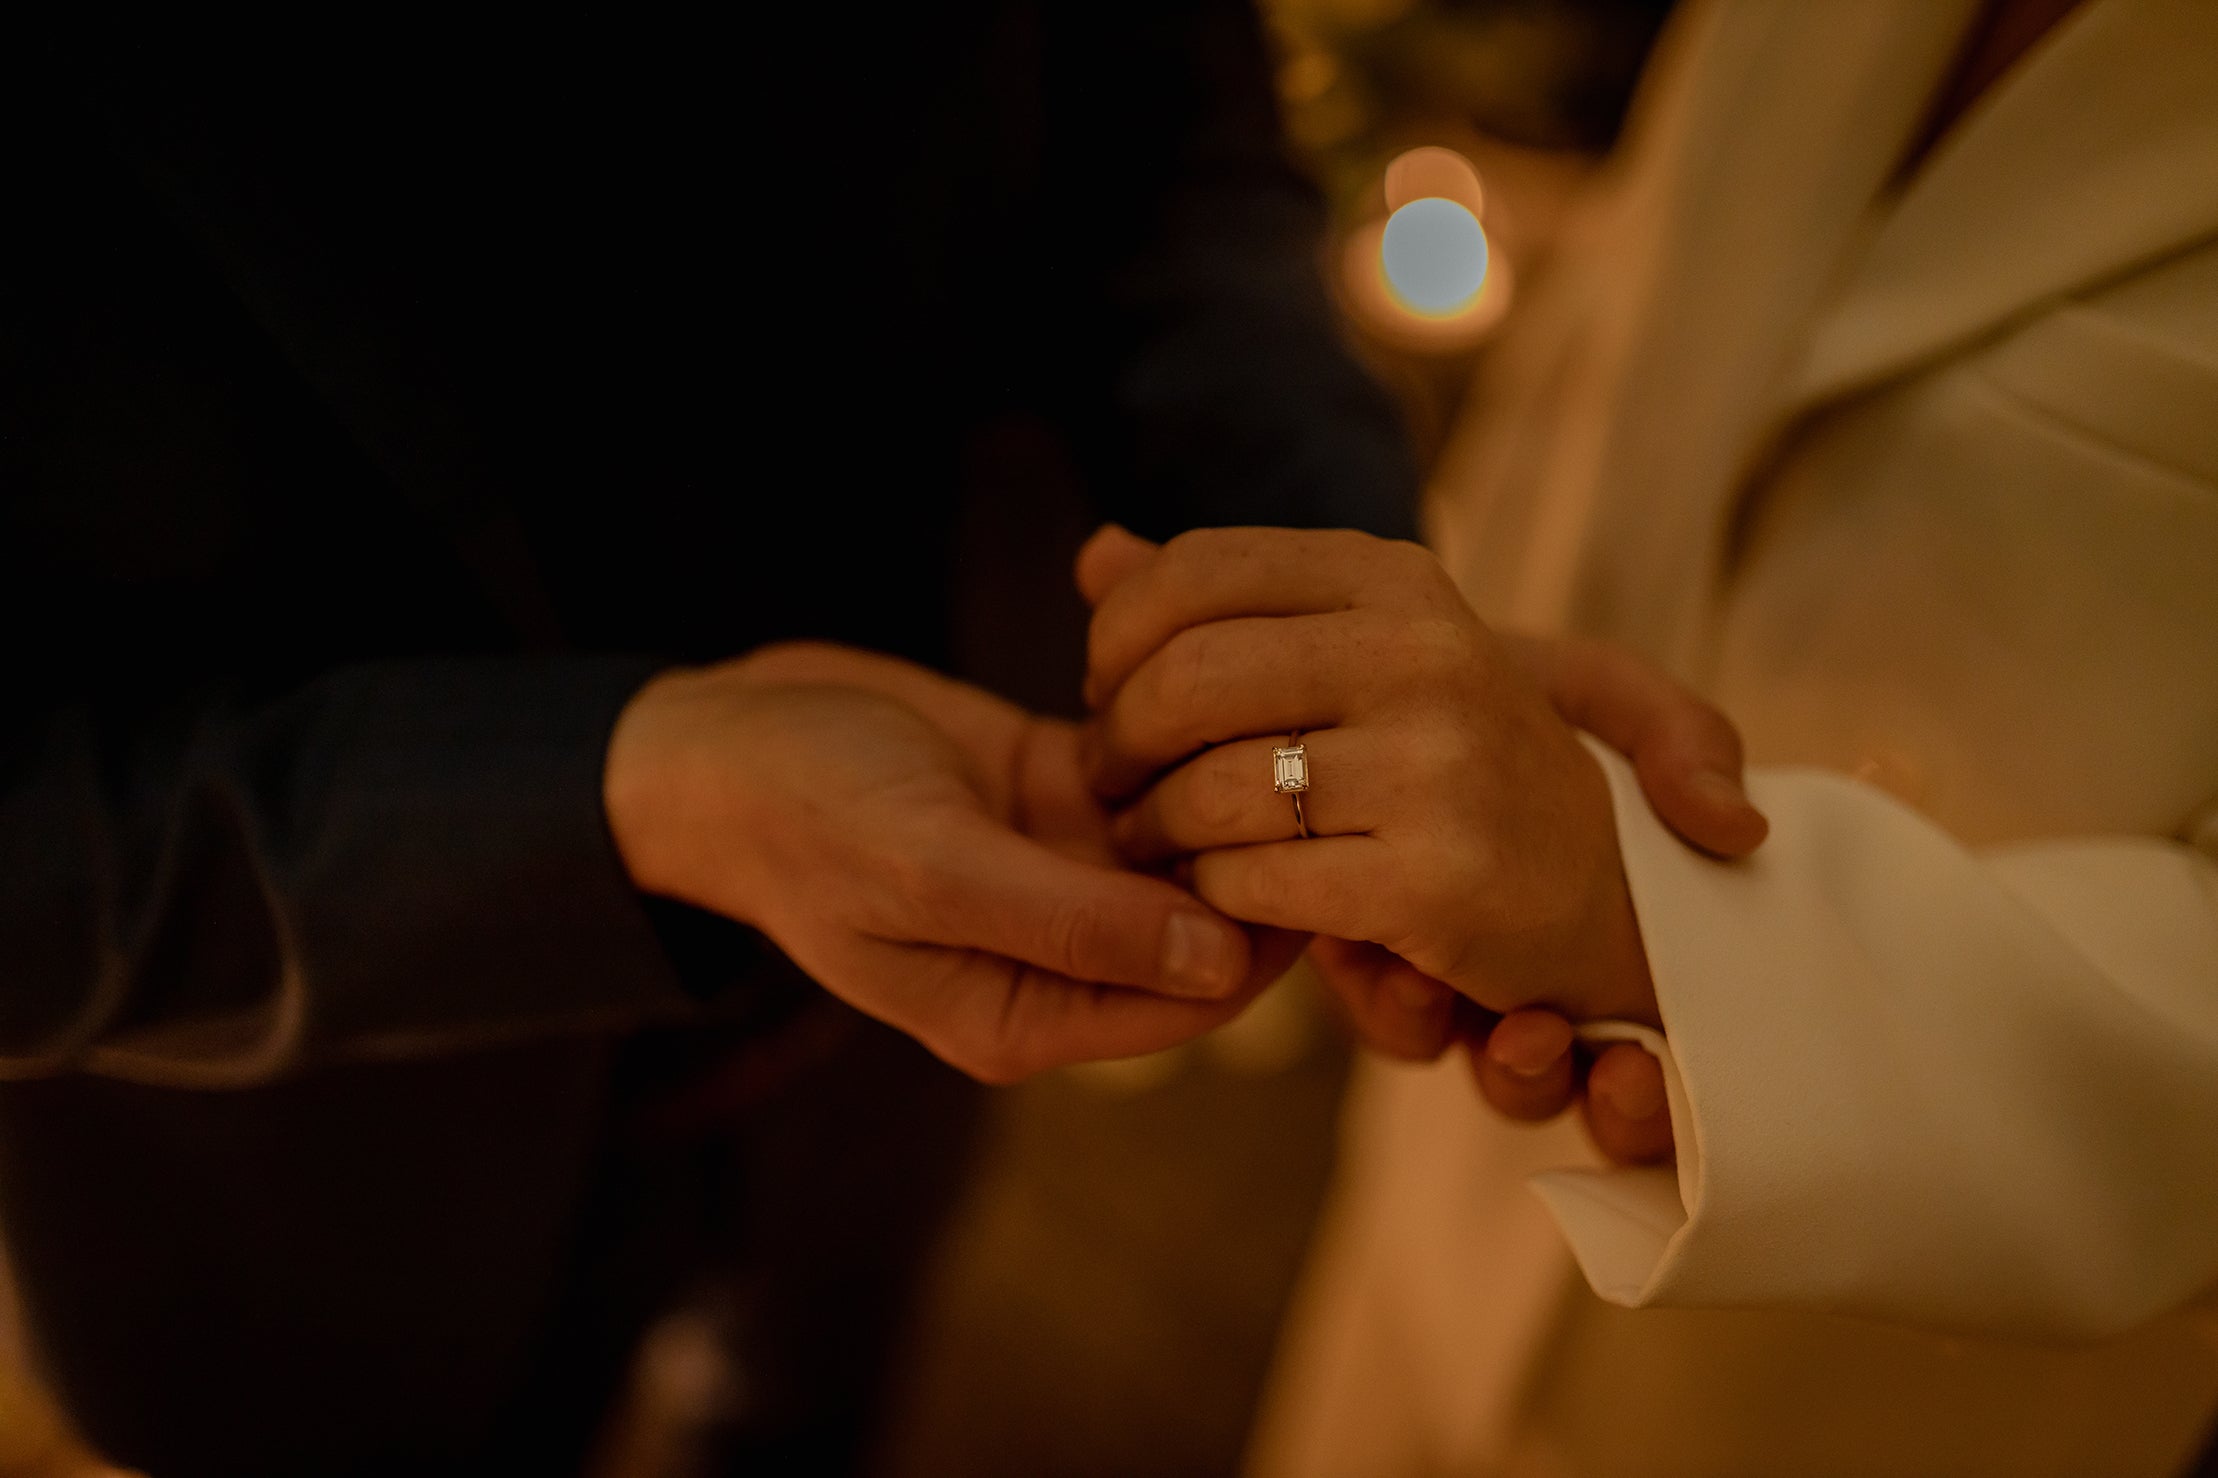 An intimate wedding proposal, a close-up of a couple's hands gently holding each other. The setting is intimate and dimly lit, with a warm golden glow illuminating the scene decorated with a bespoke floral installation designed and created by Amaranté London.